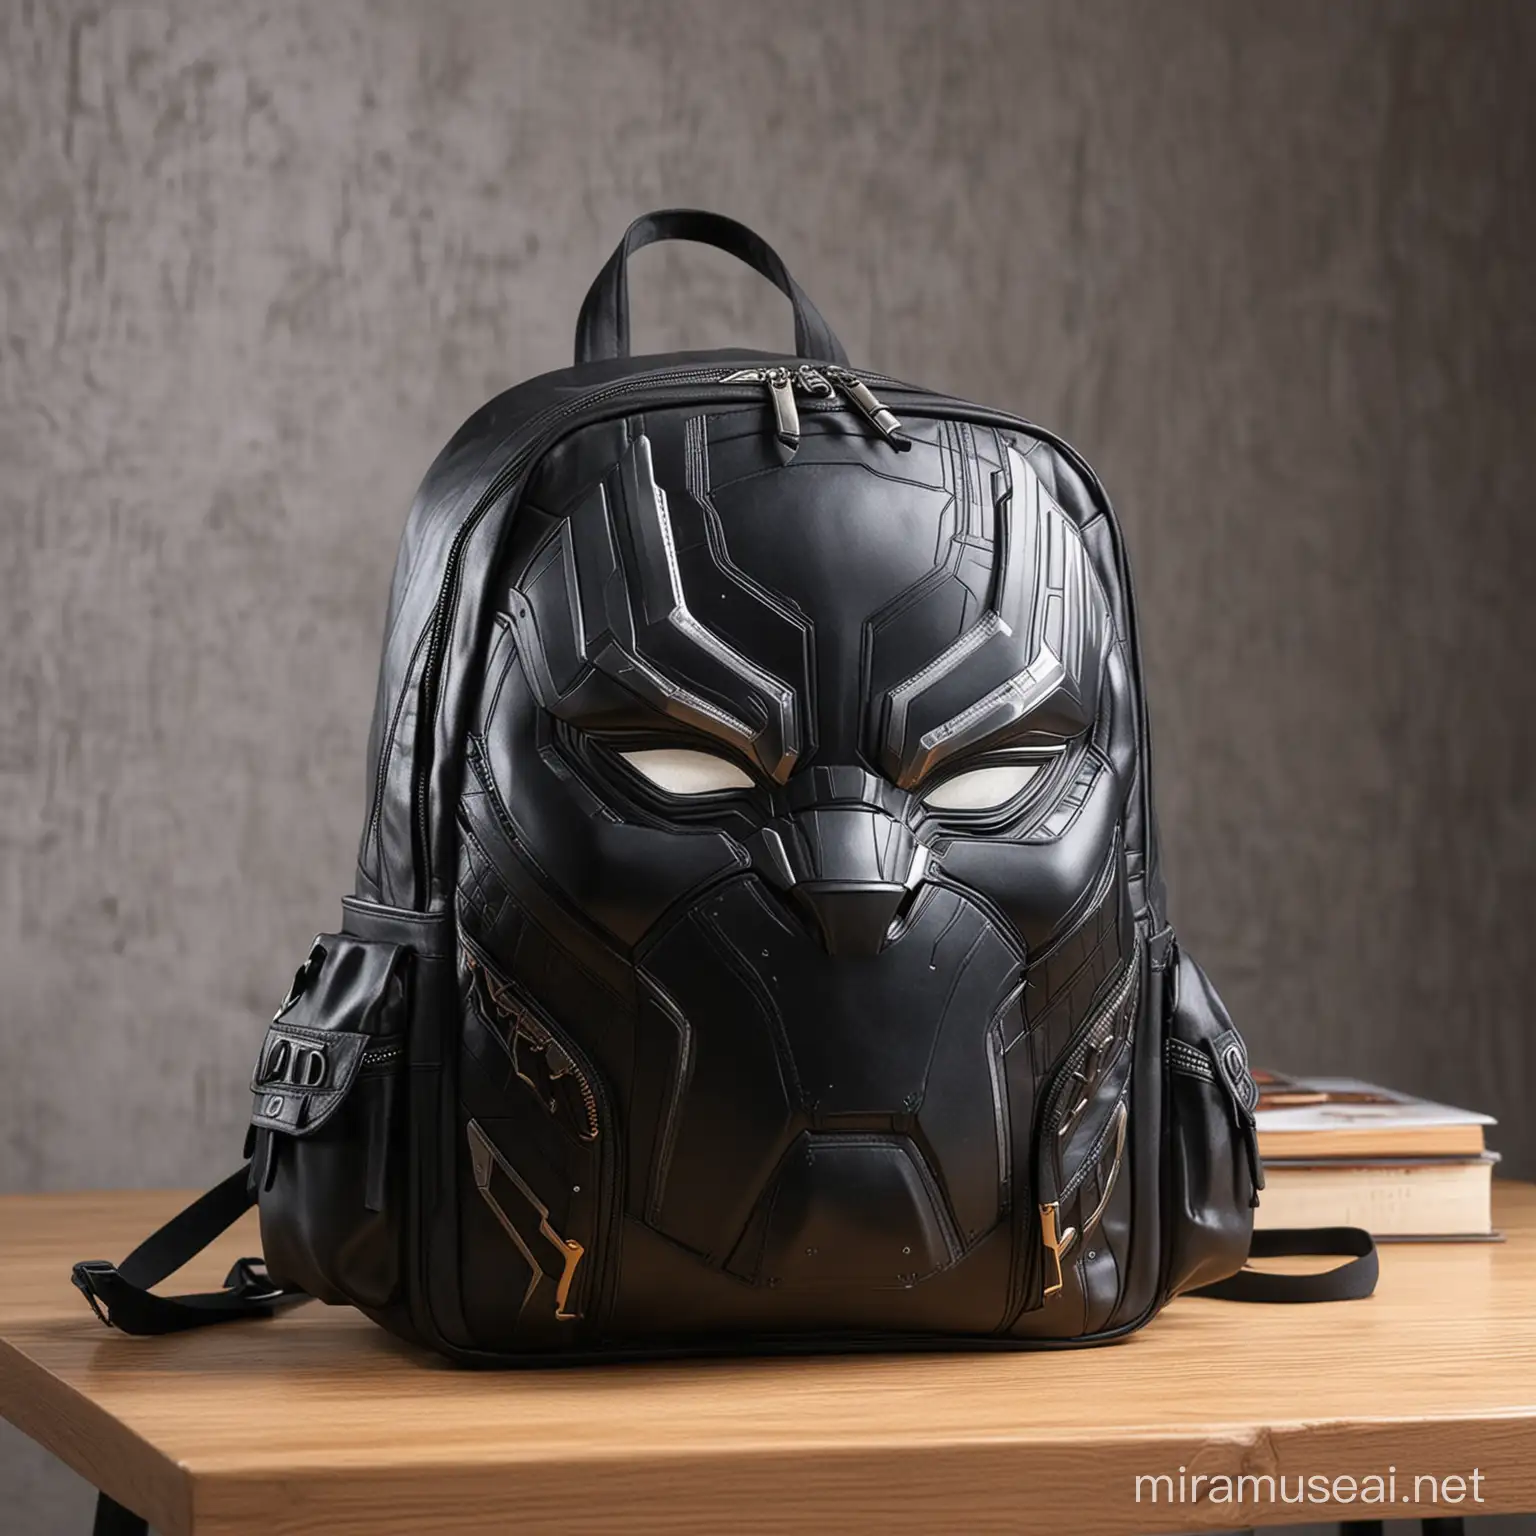 Stylish Black Panther Backpack Displayed on Table